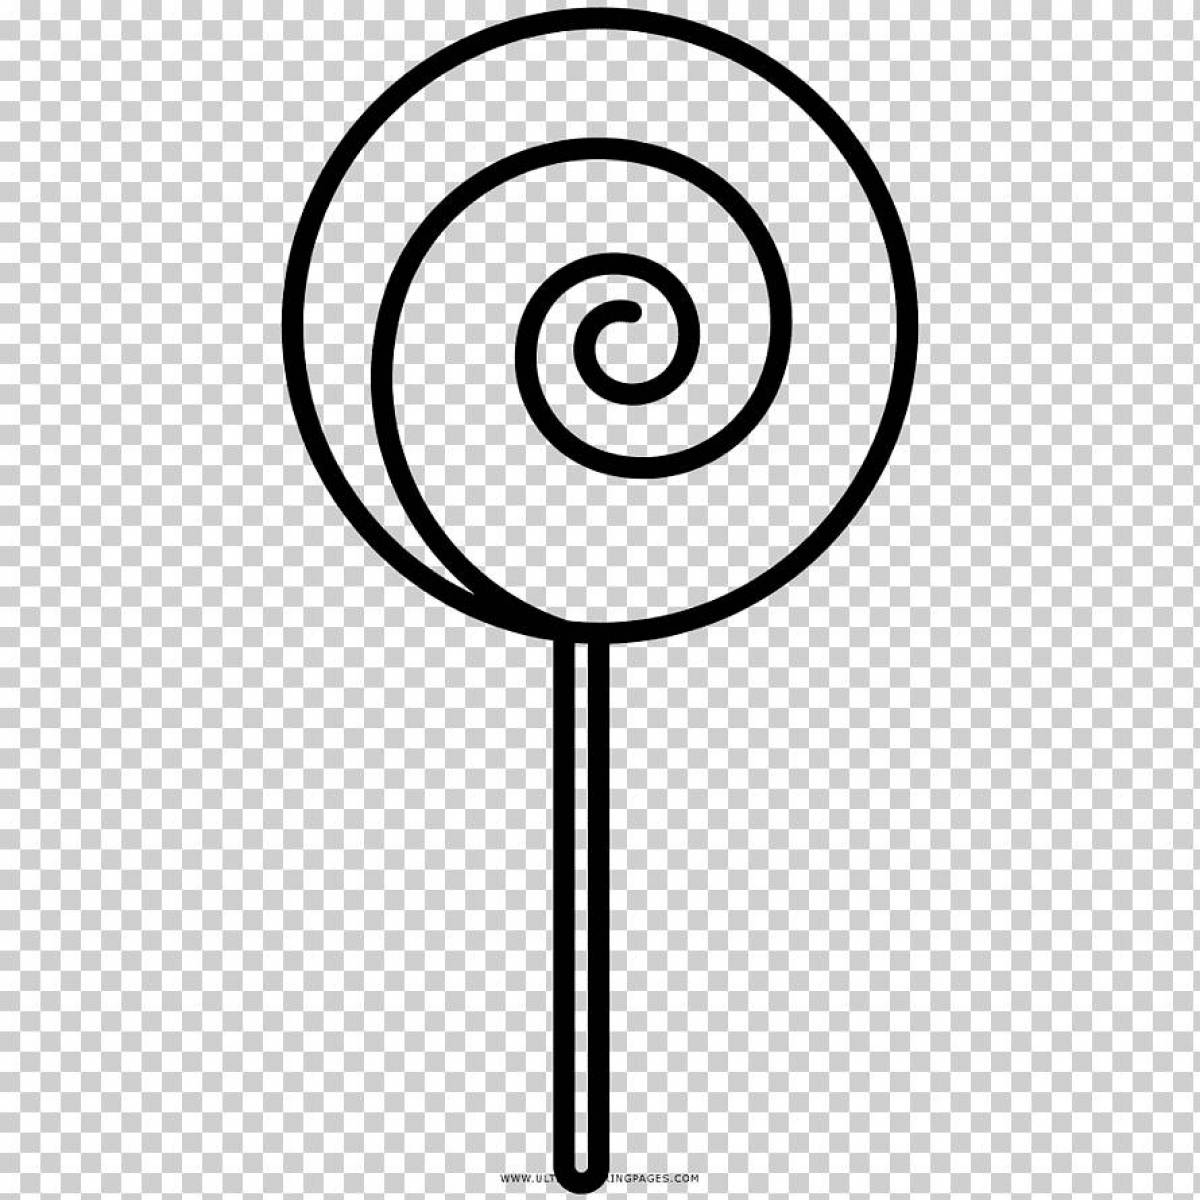 Animated lollipop coloring page